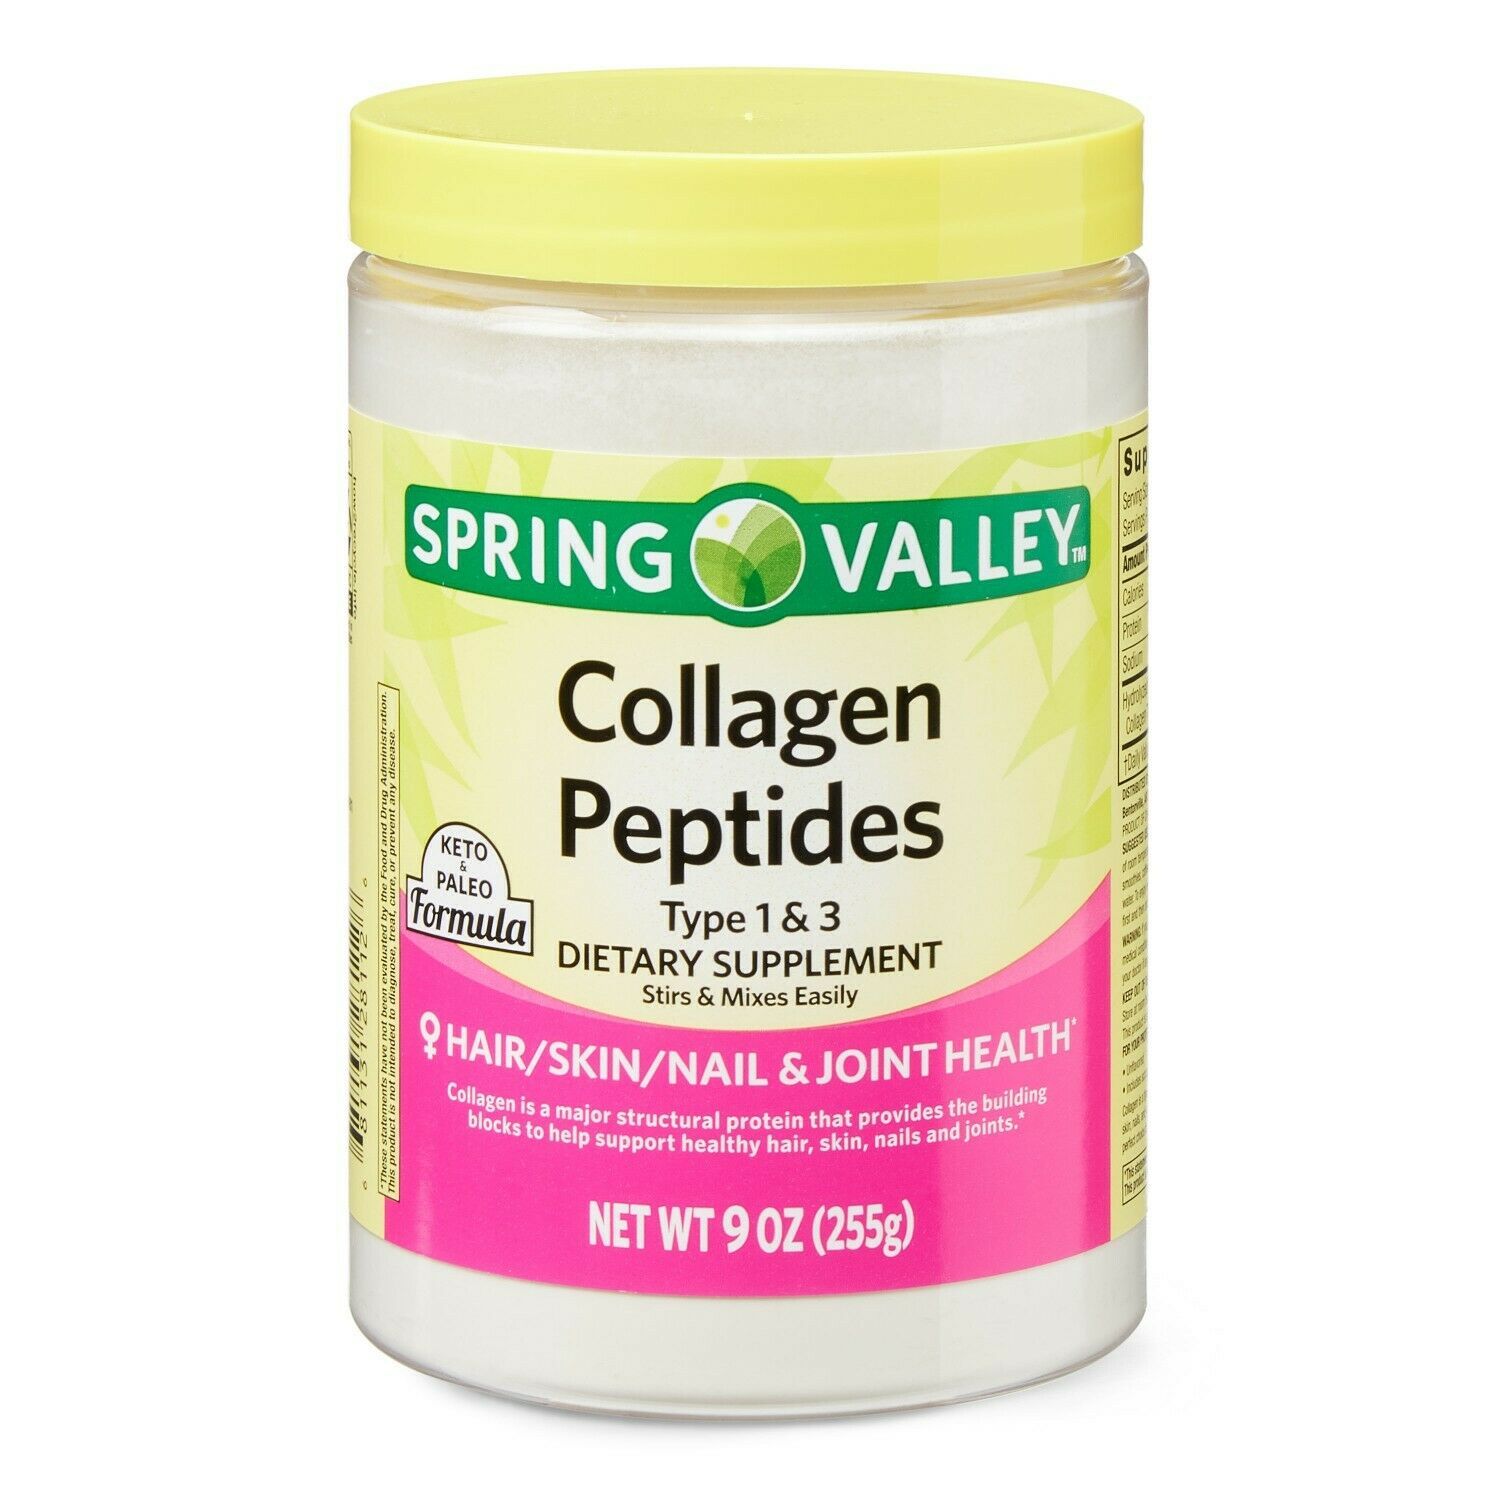 Spring Valley Collagen Peptides Powder, Type 1 And 3, 9 Oz - $22.41